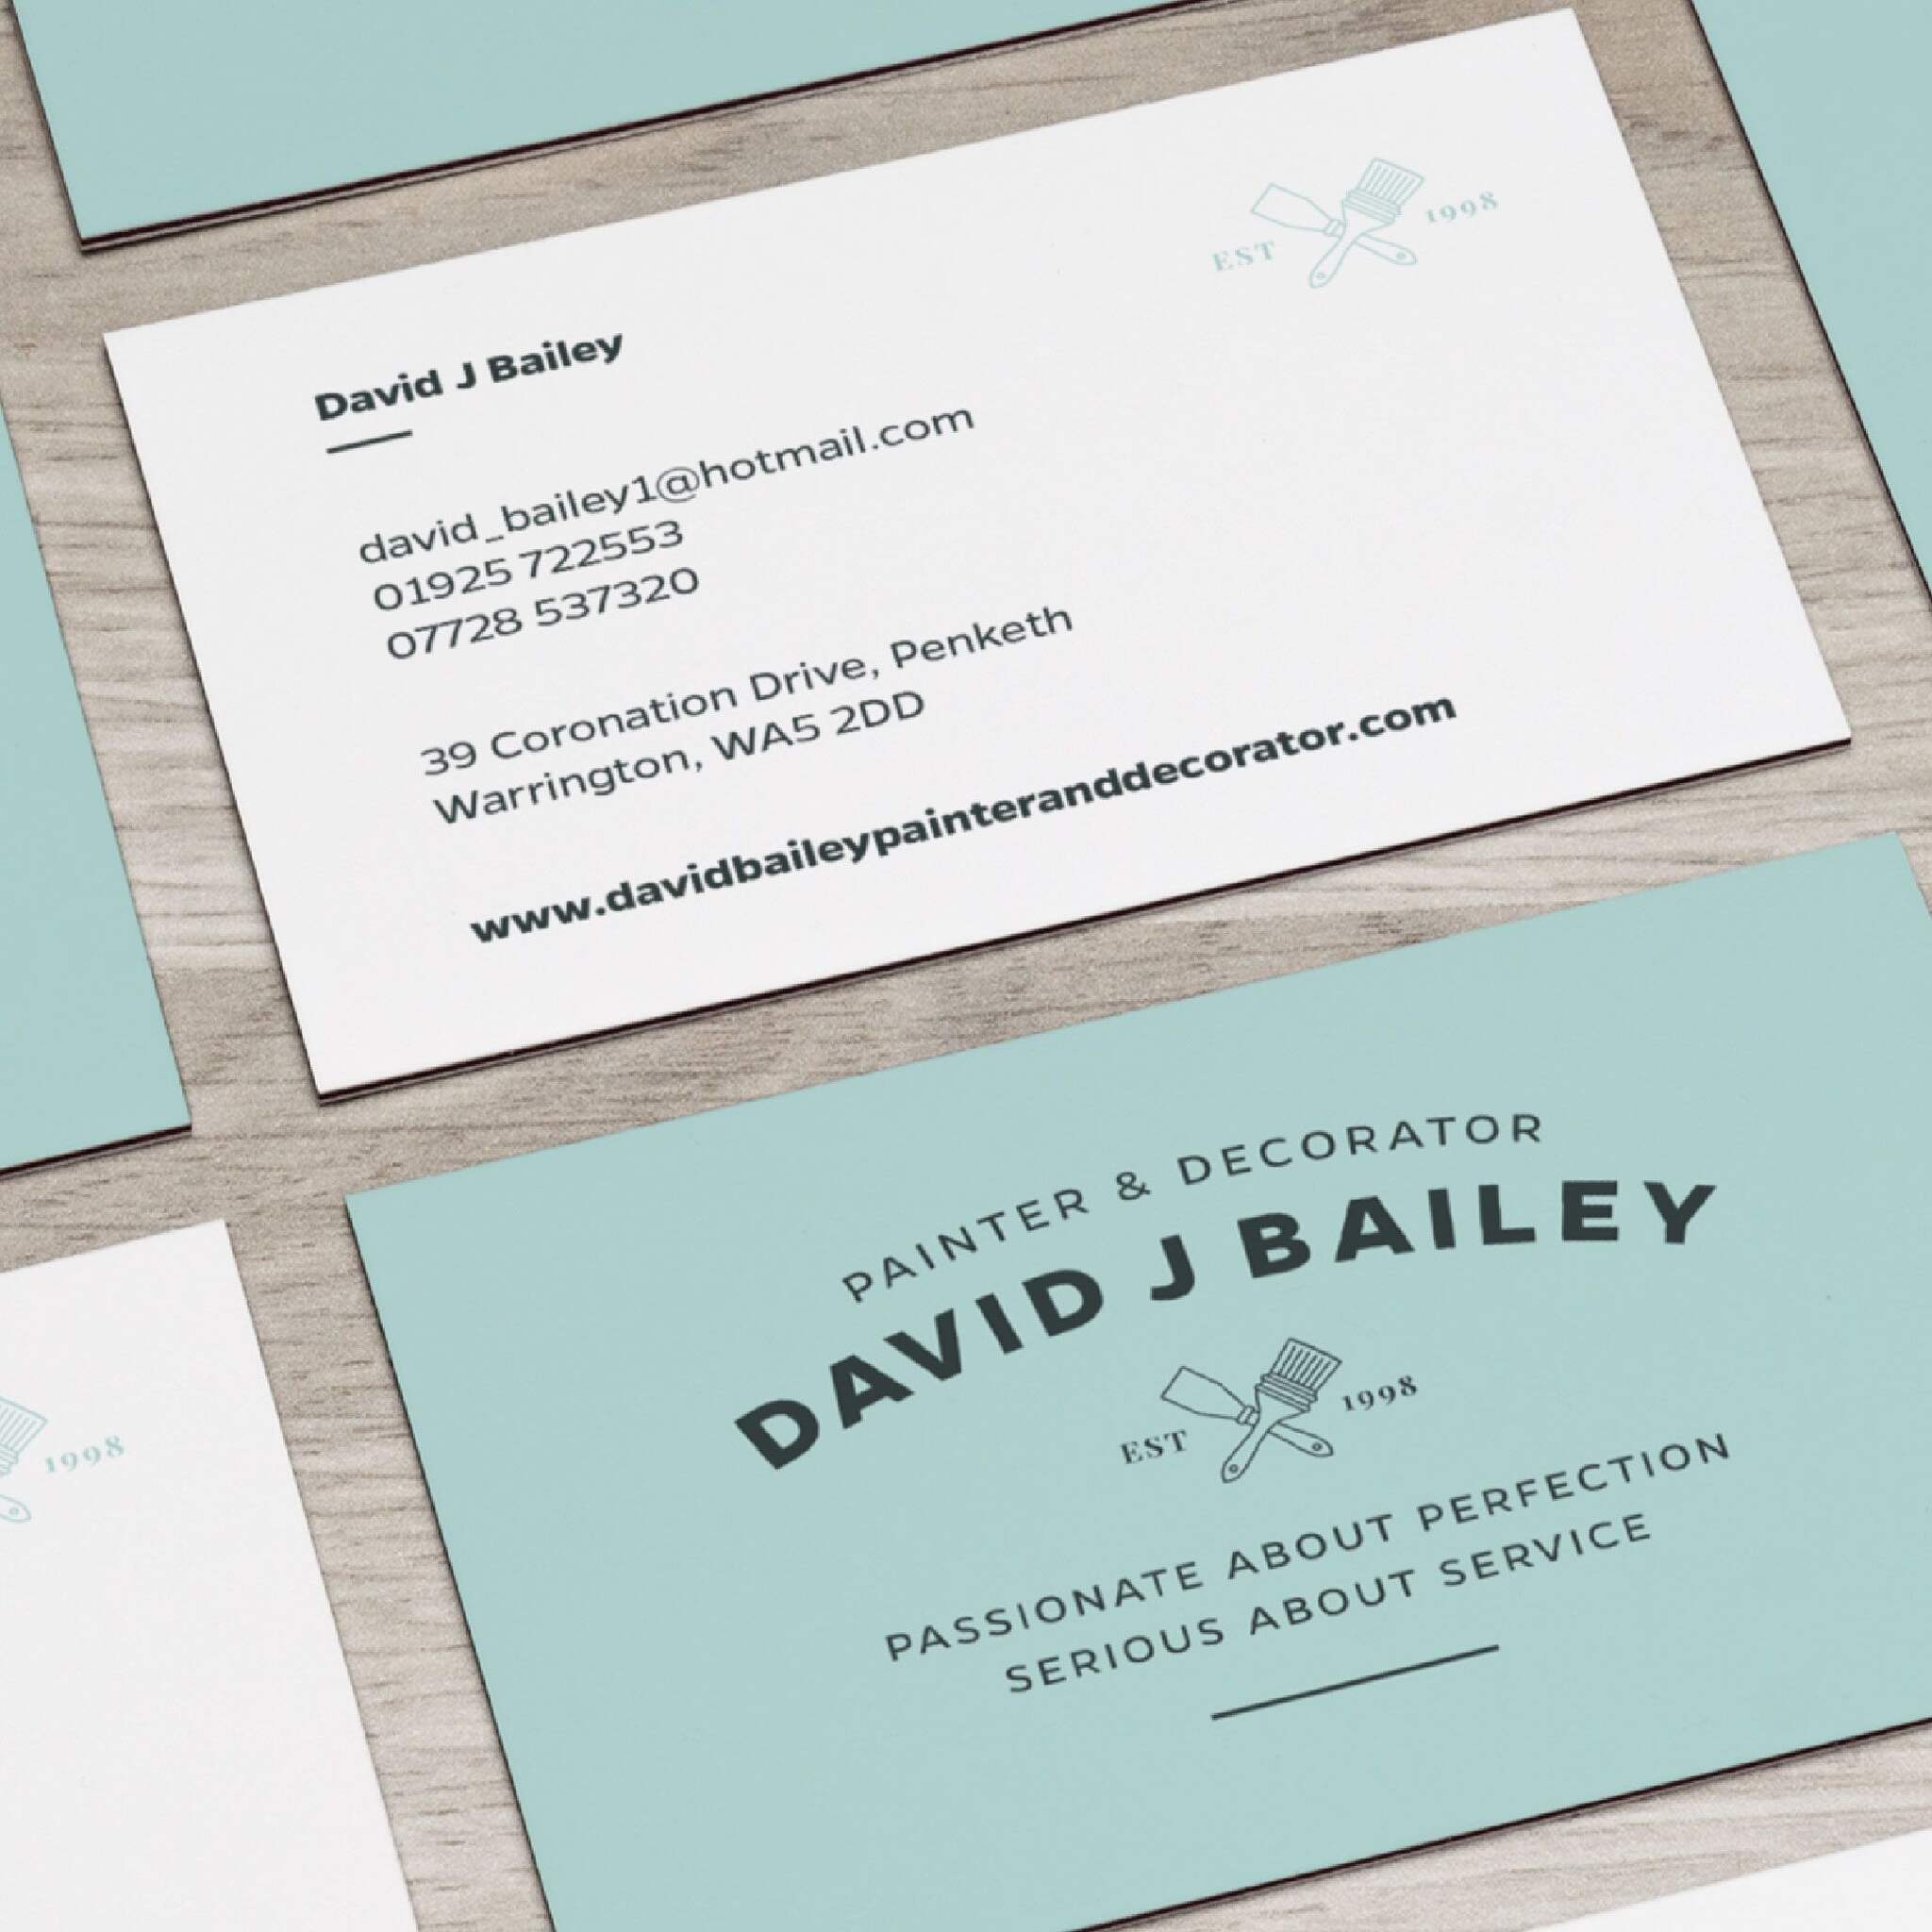 business card example that includes contact details